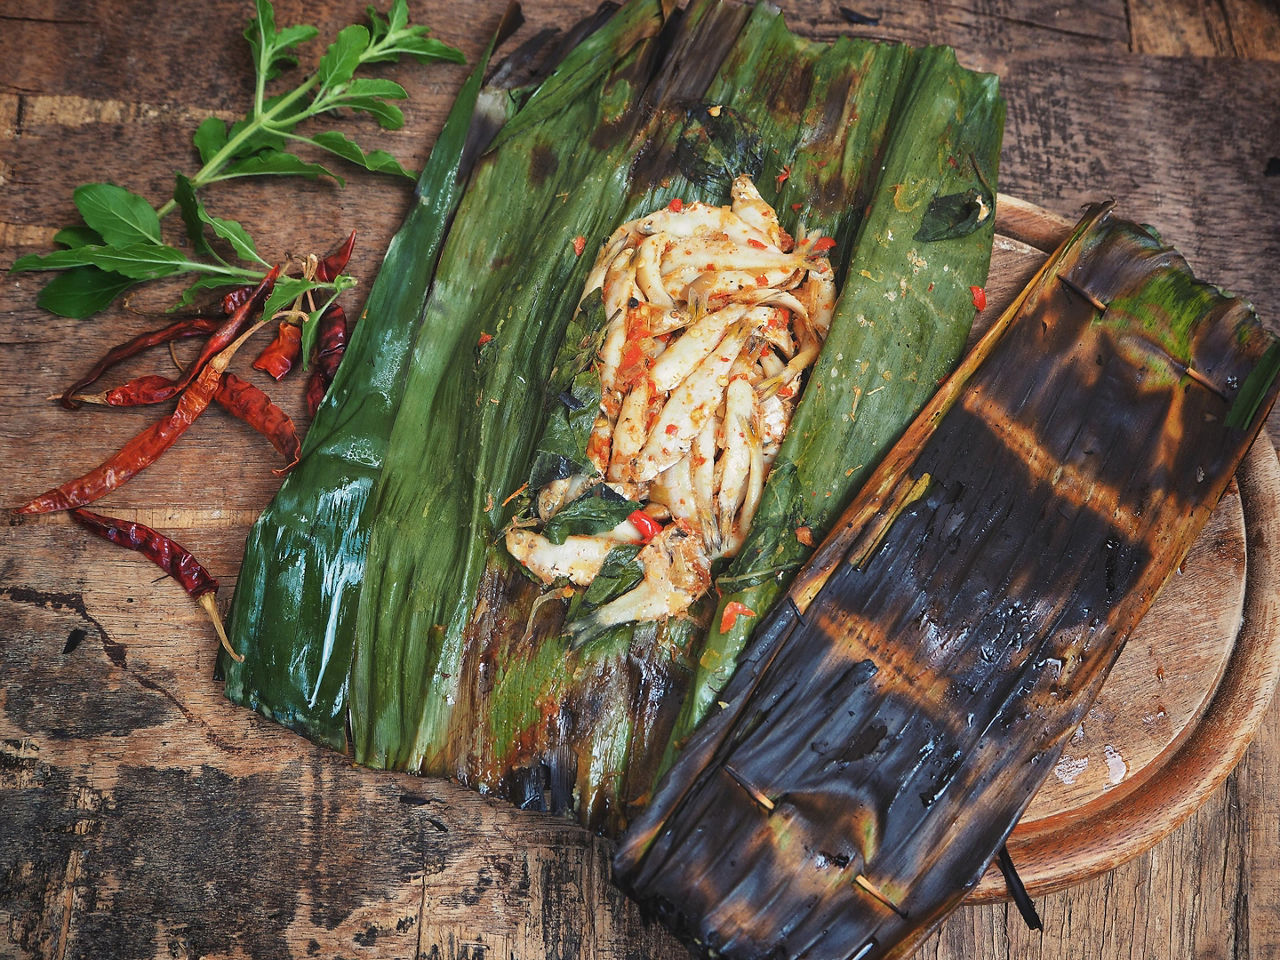 Grilled fish in a banana leaf